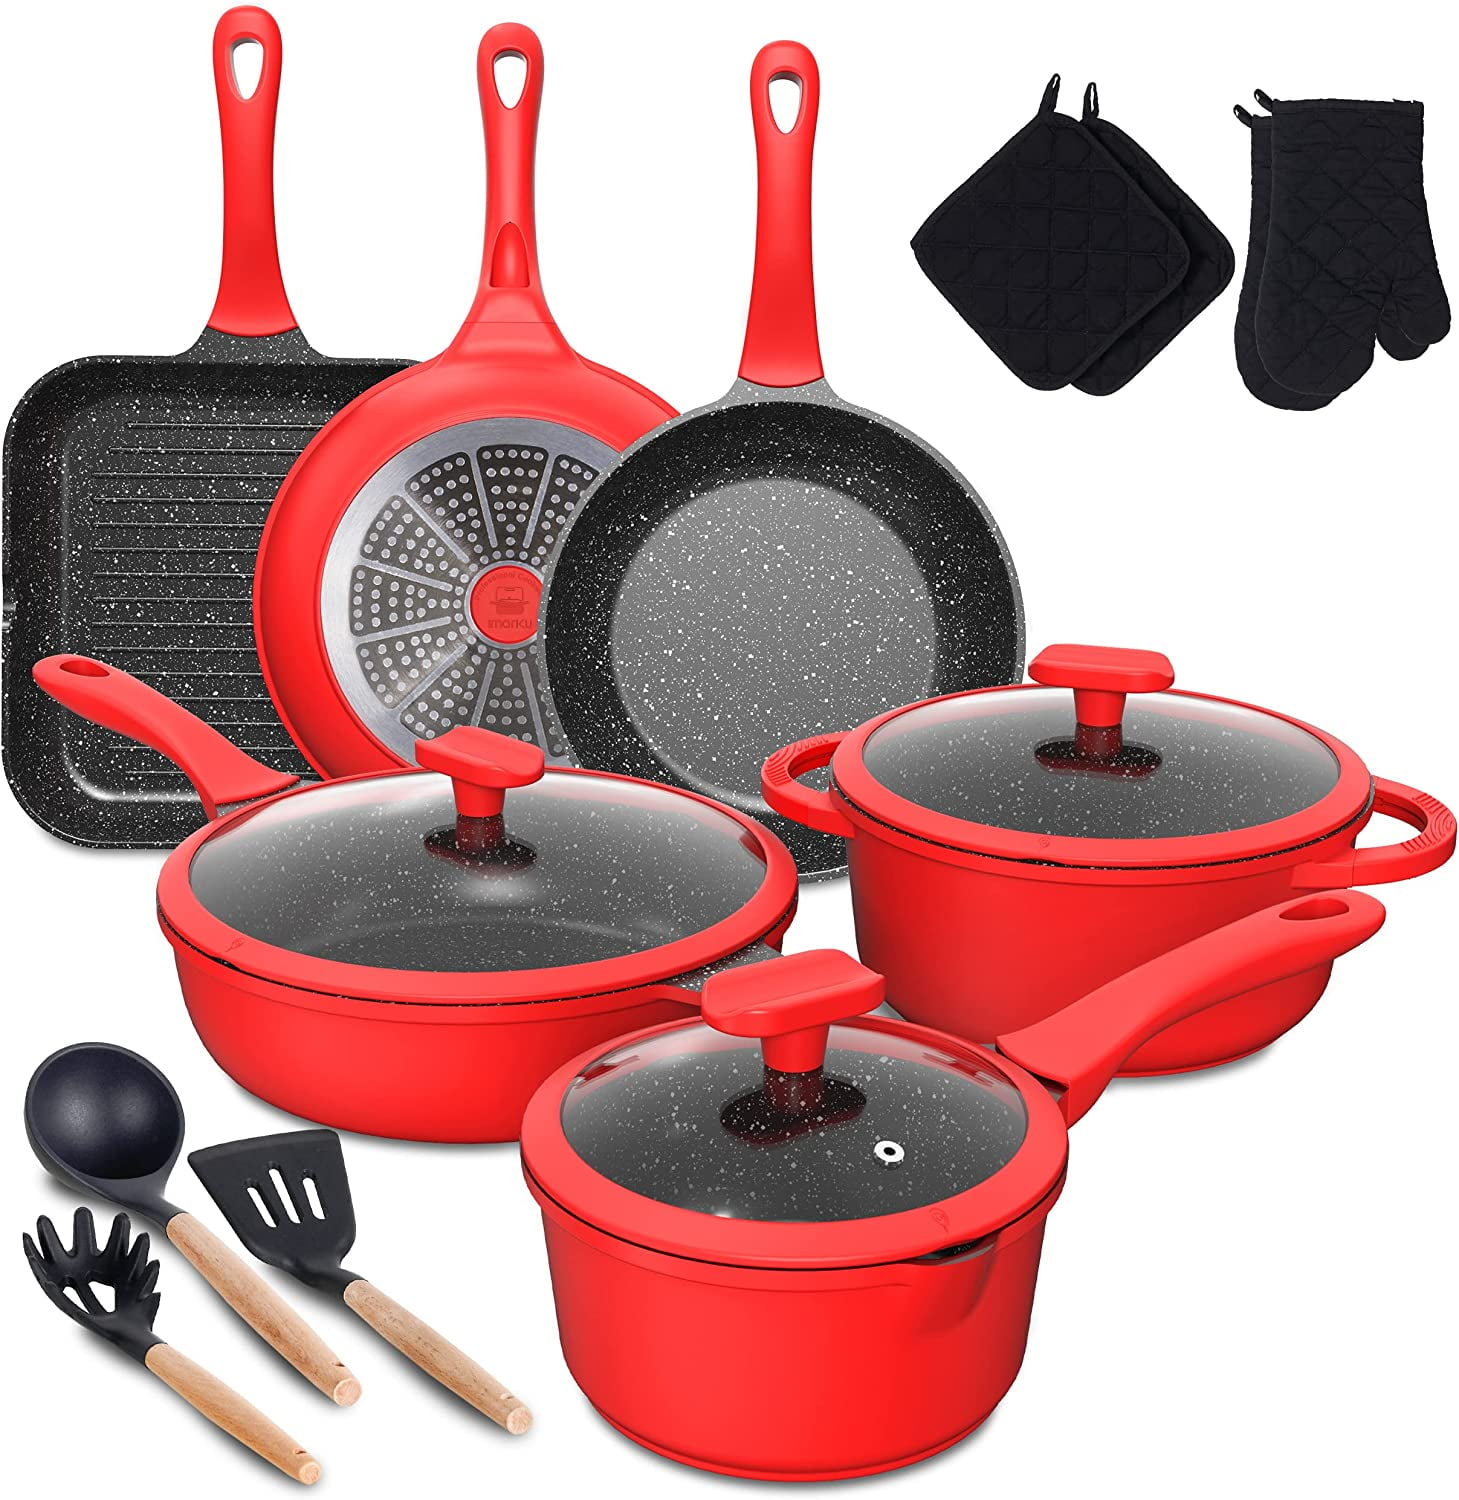 imarku Pot Set with Removeable Handle, 8inch & 12inch Honeycomb Nonstick  Frying Pan Set, Dishwasher Safe, Oven Safe Fast Heating Pots and Pans Set